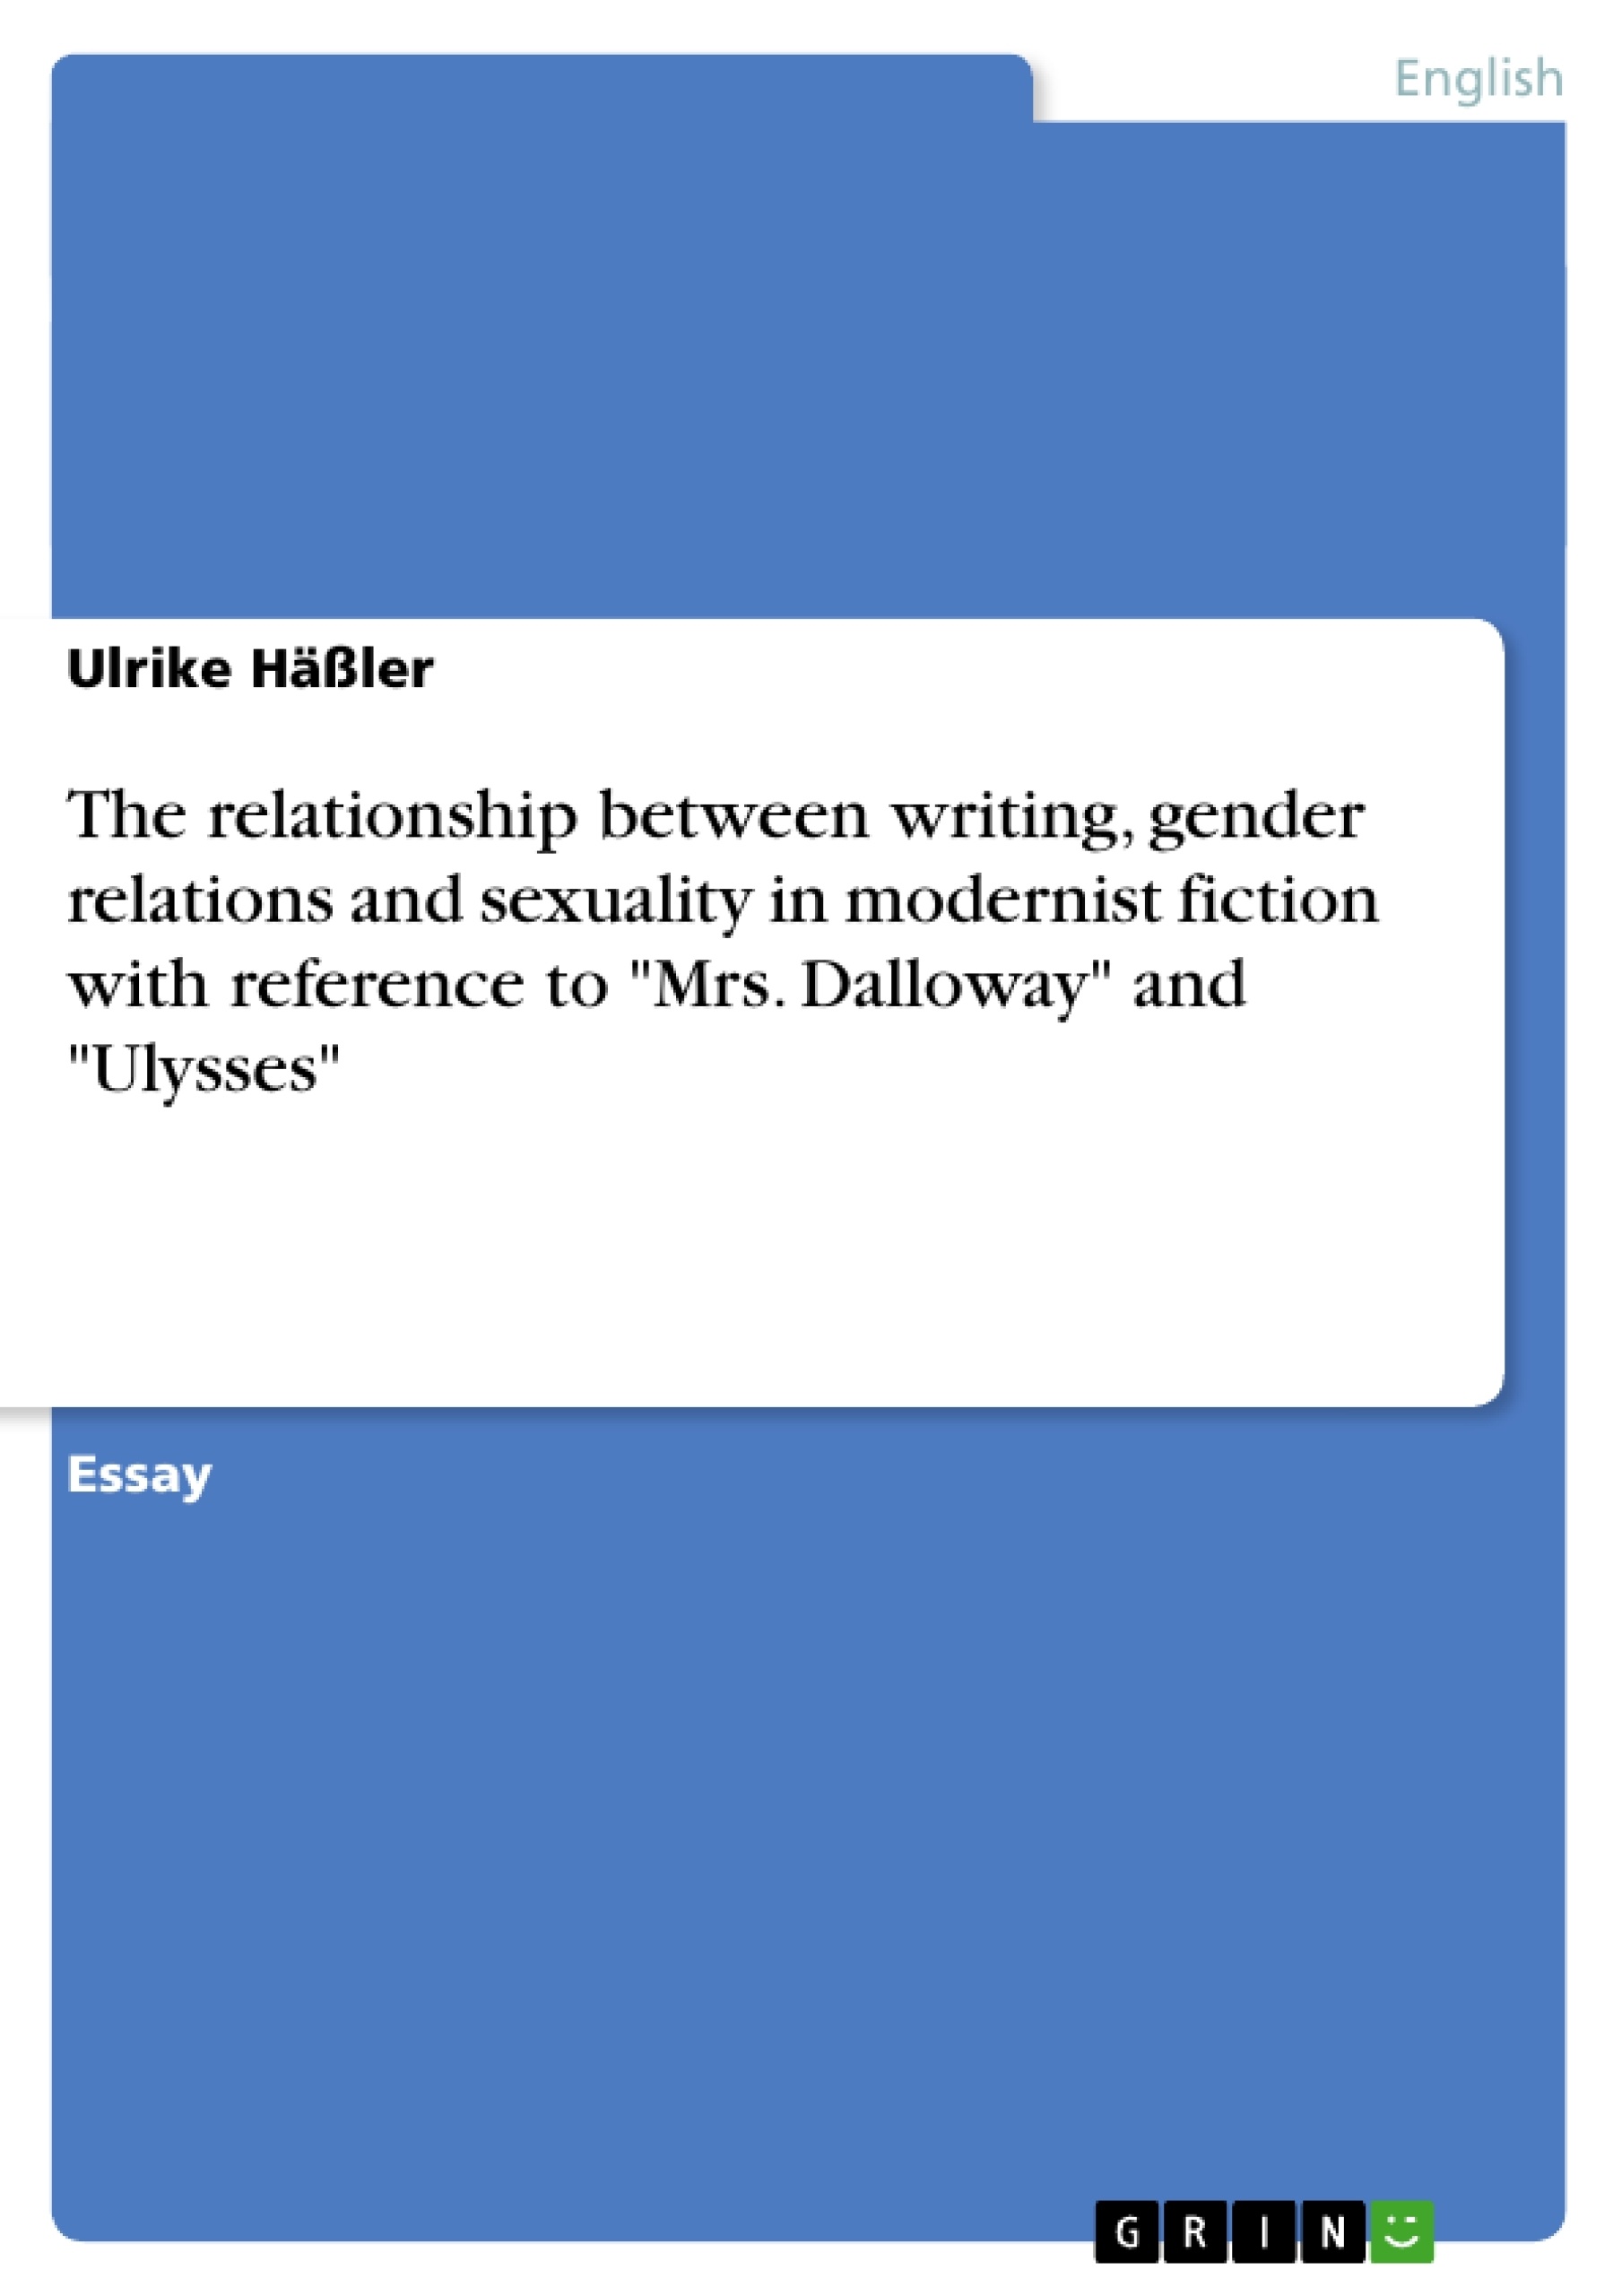 Título: The relationship between writing, gender relations and sexuality in modernist fiction with reference to "Mrs. Dalloway" and "Ulysses"